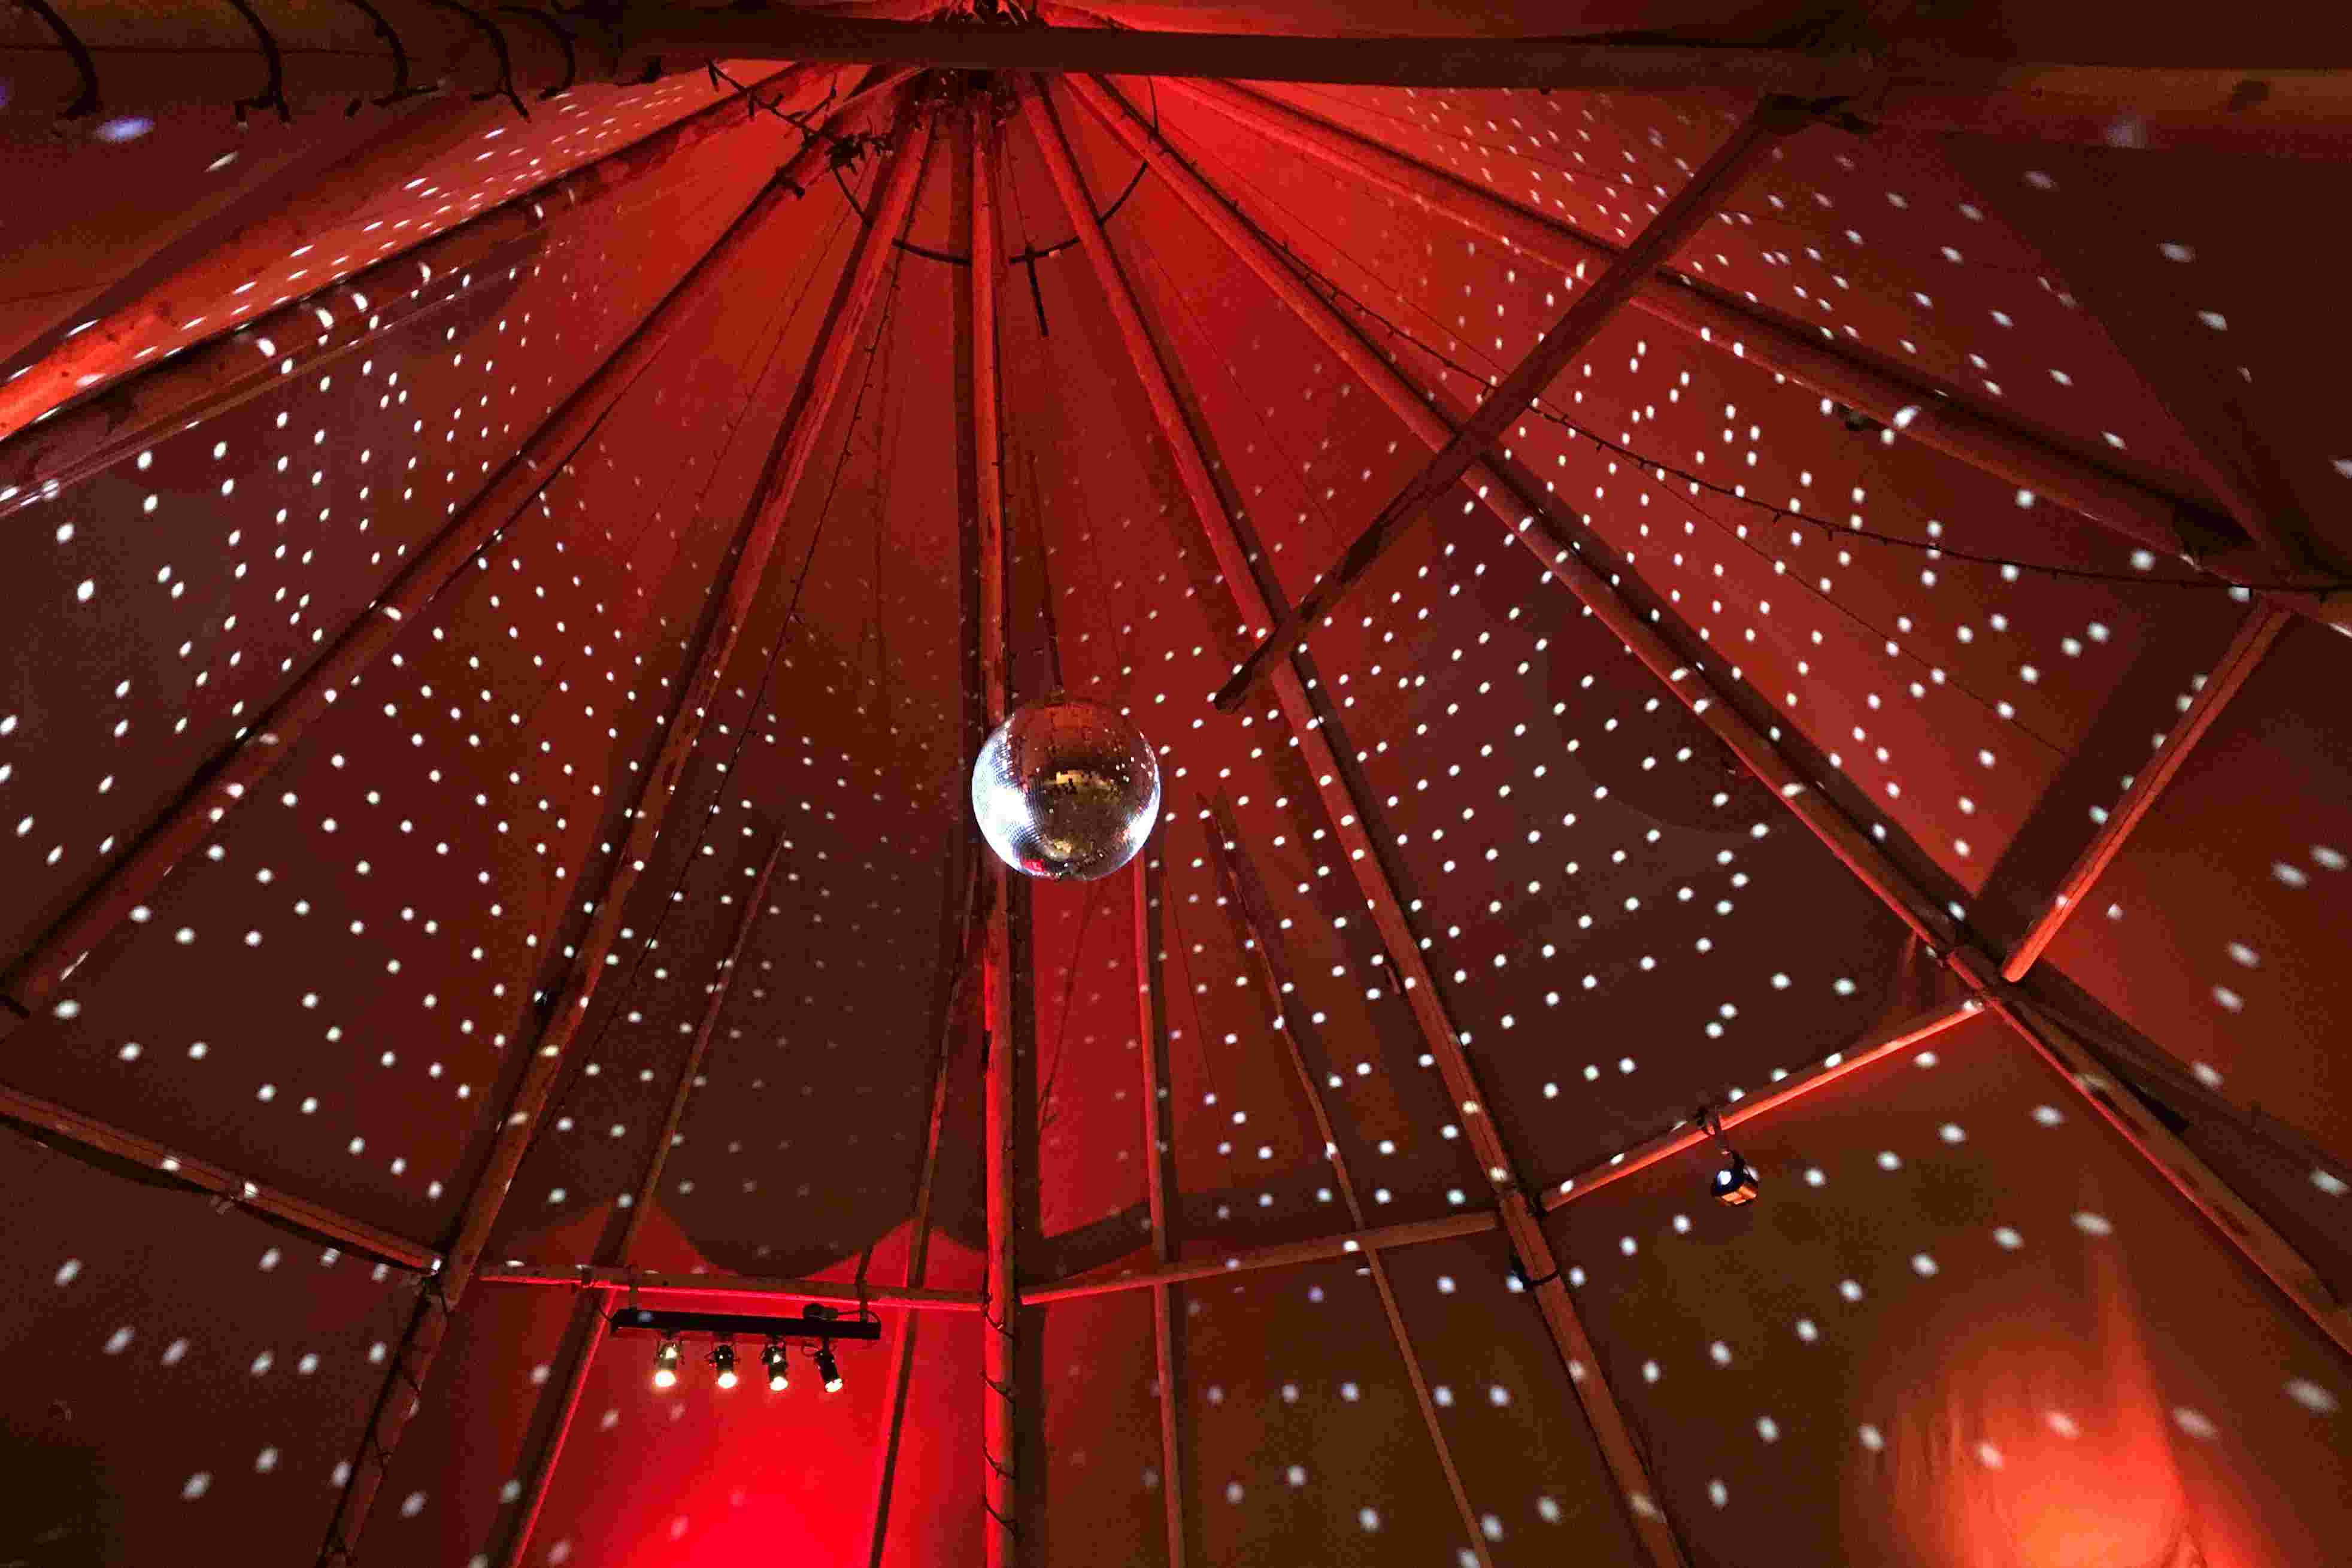 Disco ball effect in a tipi